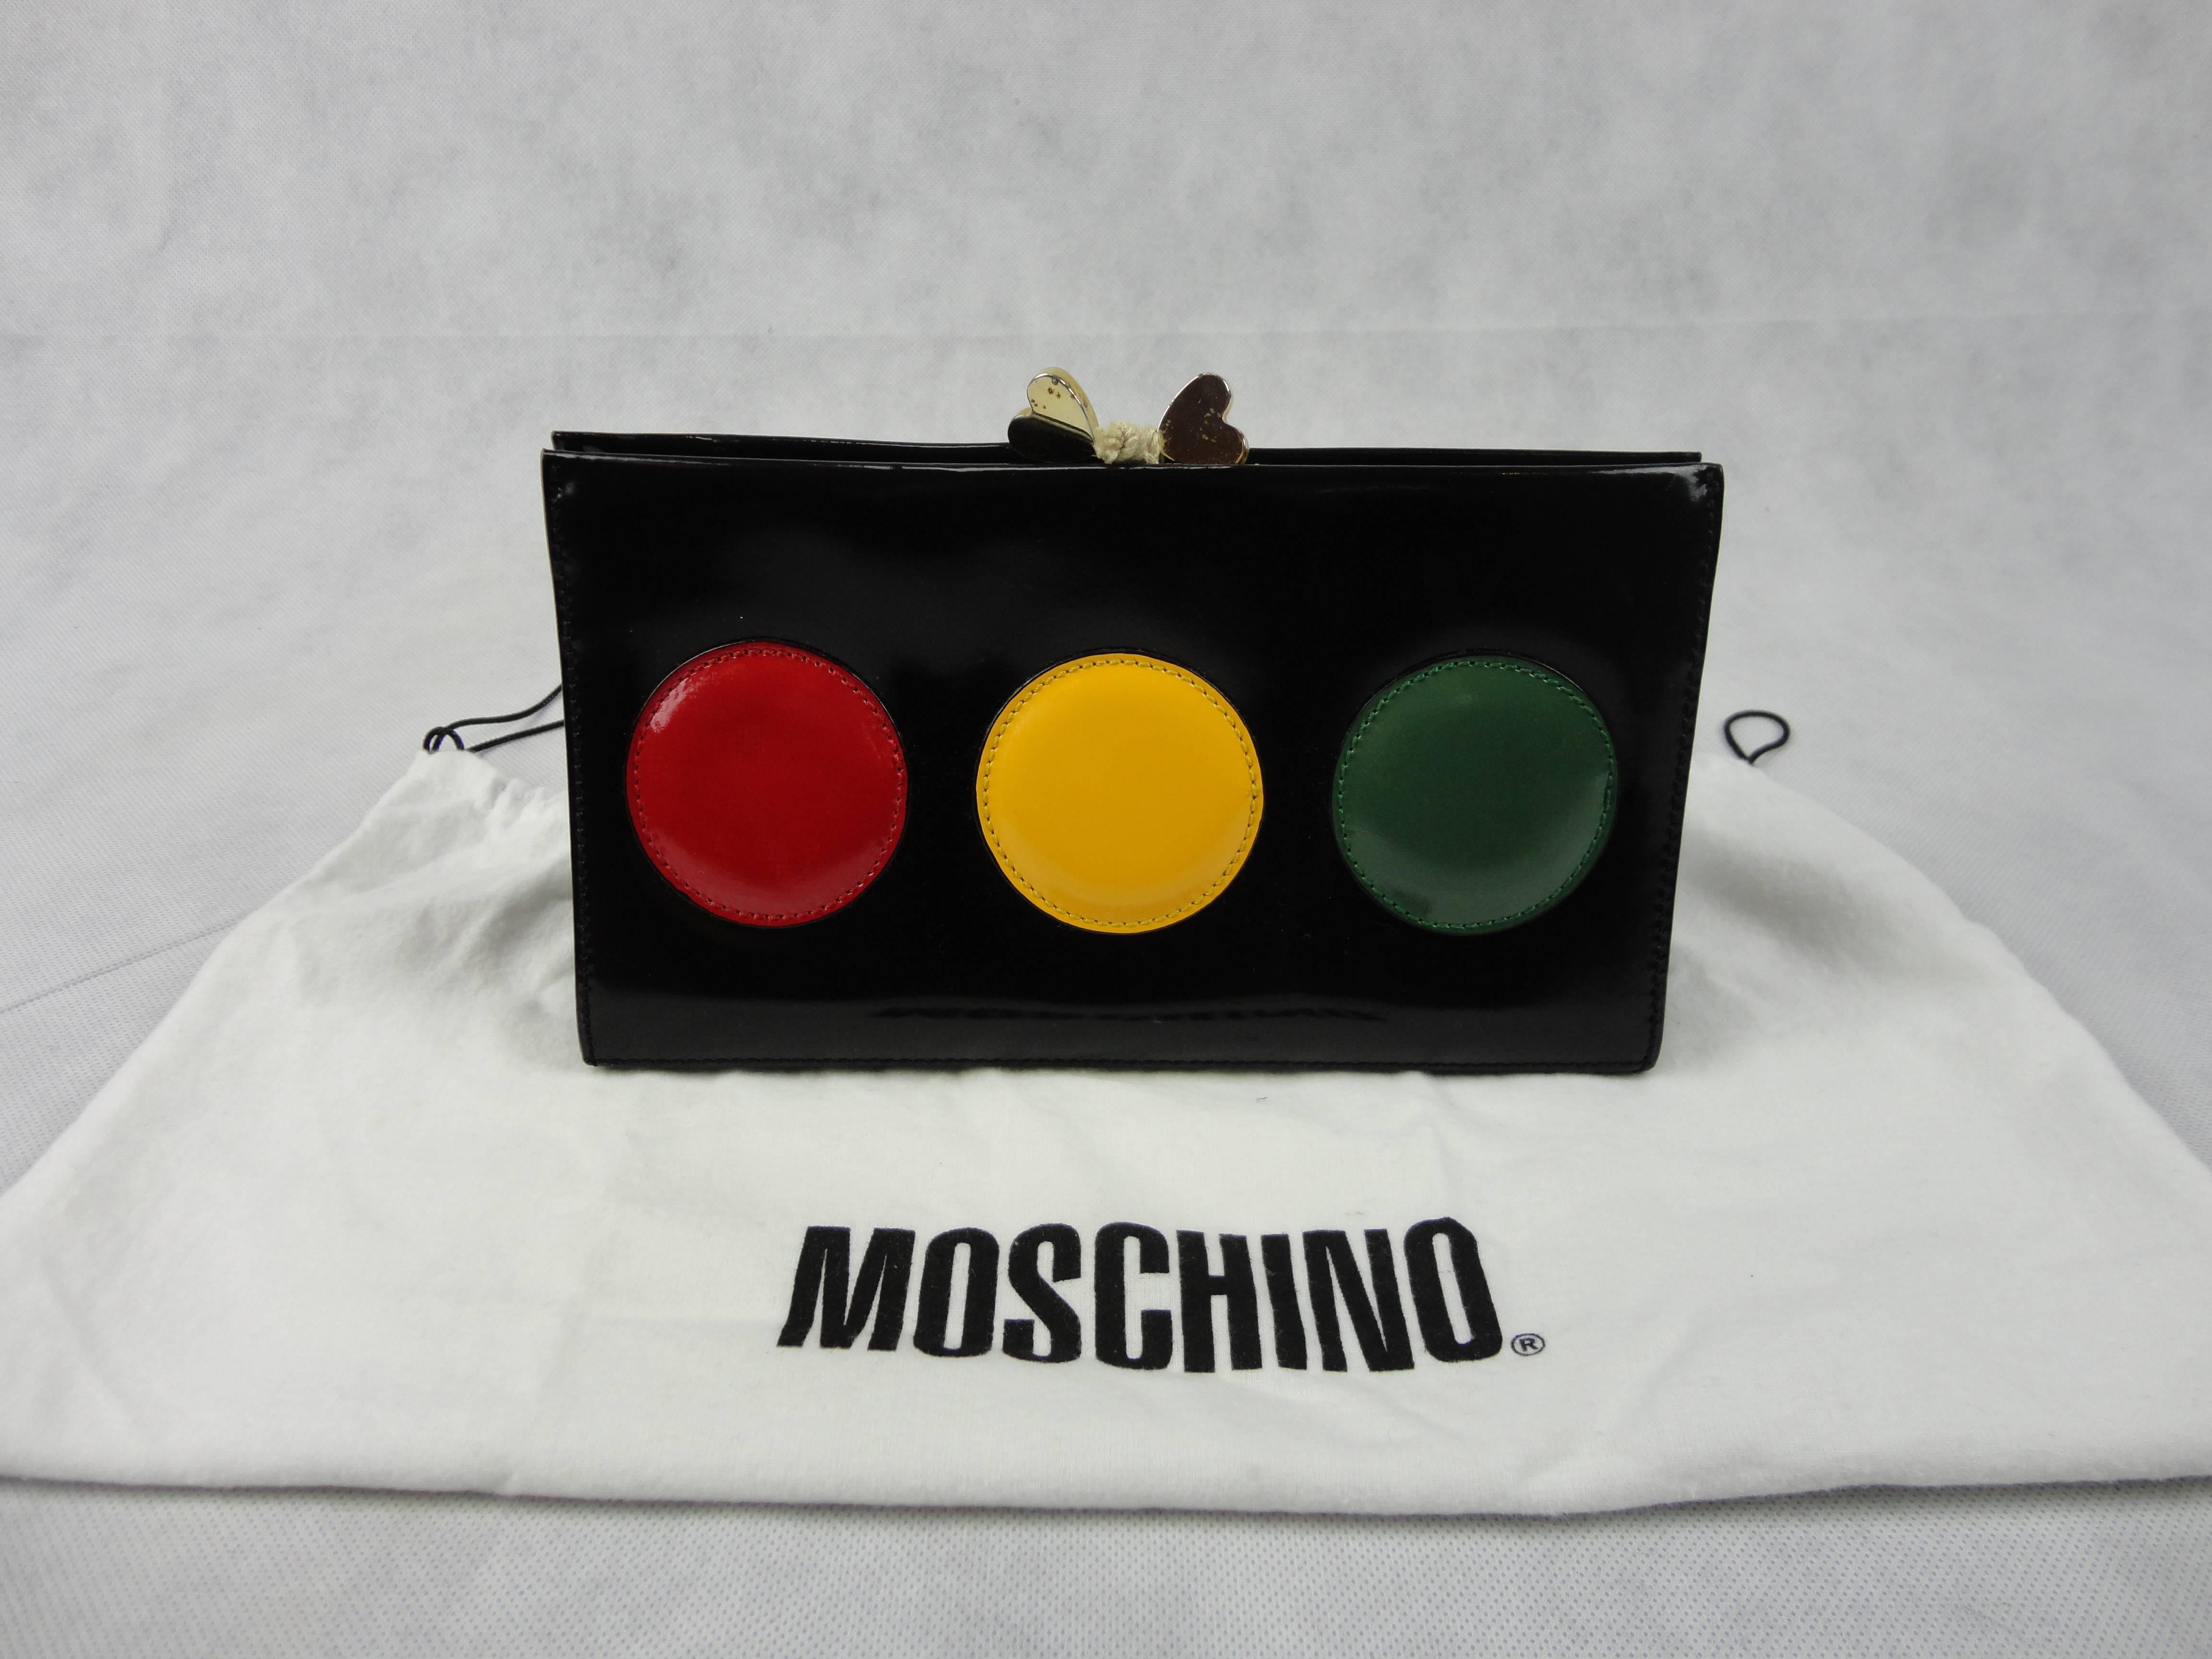 One of a kind Vintage moschino traffic light bag with detachable gold chain strap. According to Rachel Zoe this is one of the most coveted Moschino vintage bags. A truly collectors piece.
Mint condition, never got out of my closet.
Can be used on